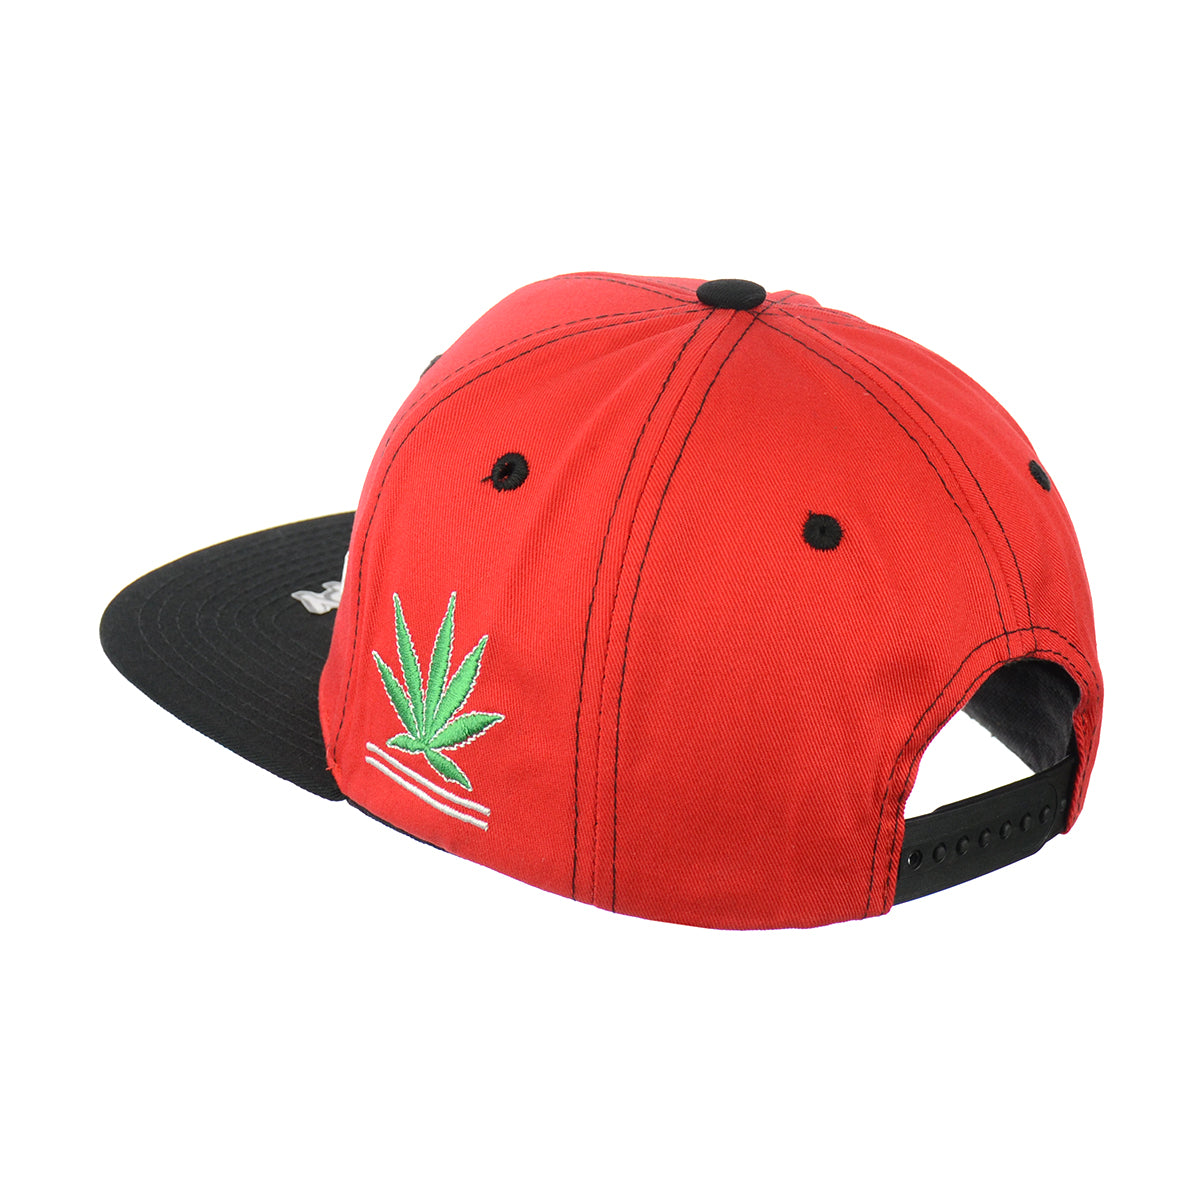 Peace Love Weed Hat Embroidered Snapback Hat